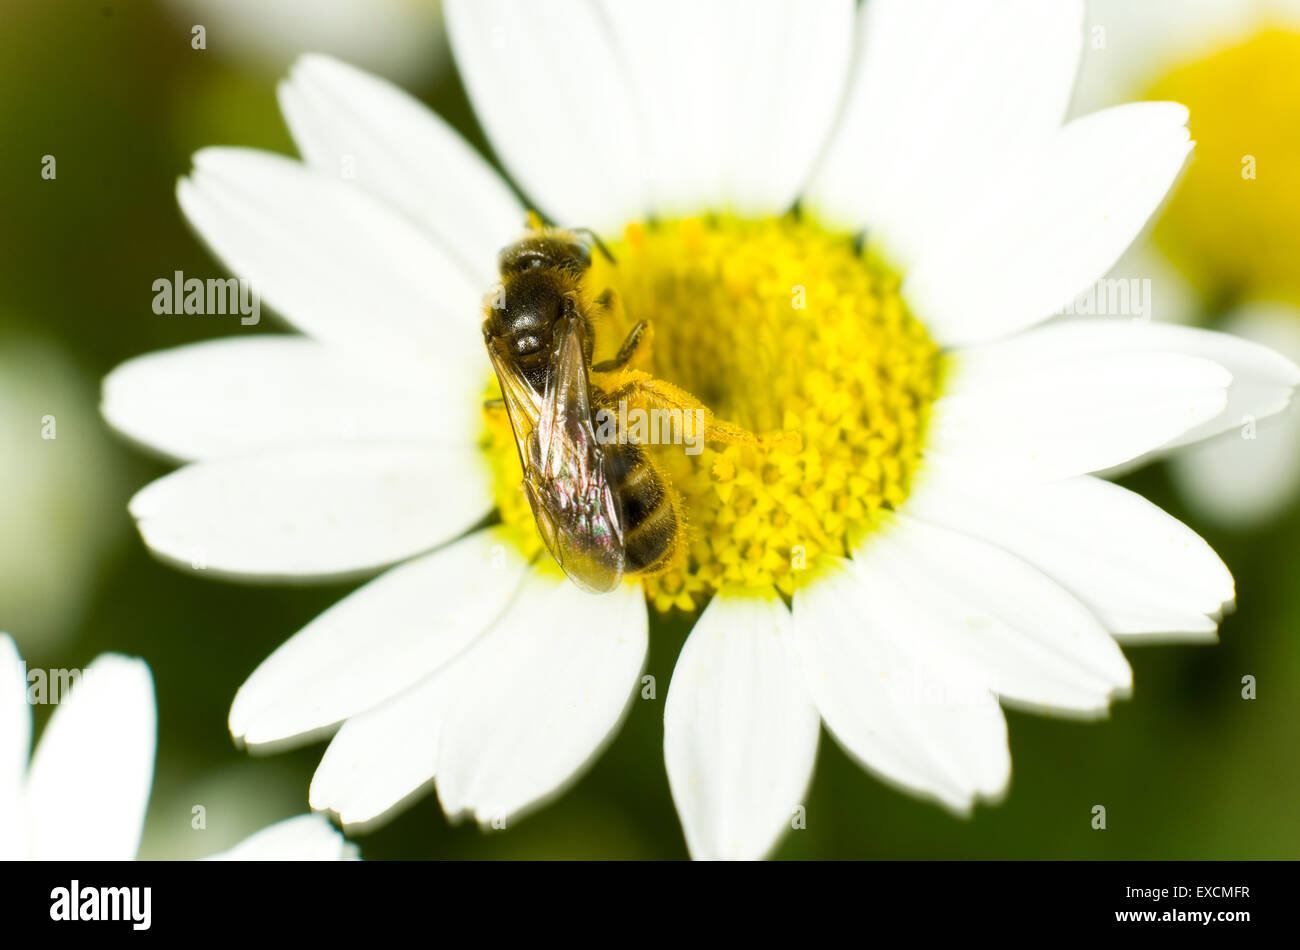 small-mining-bee-covered-in-pollen-on-a-